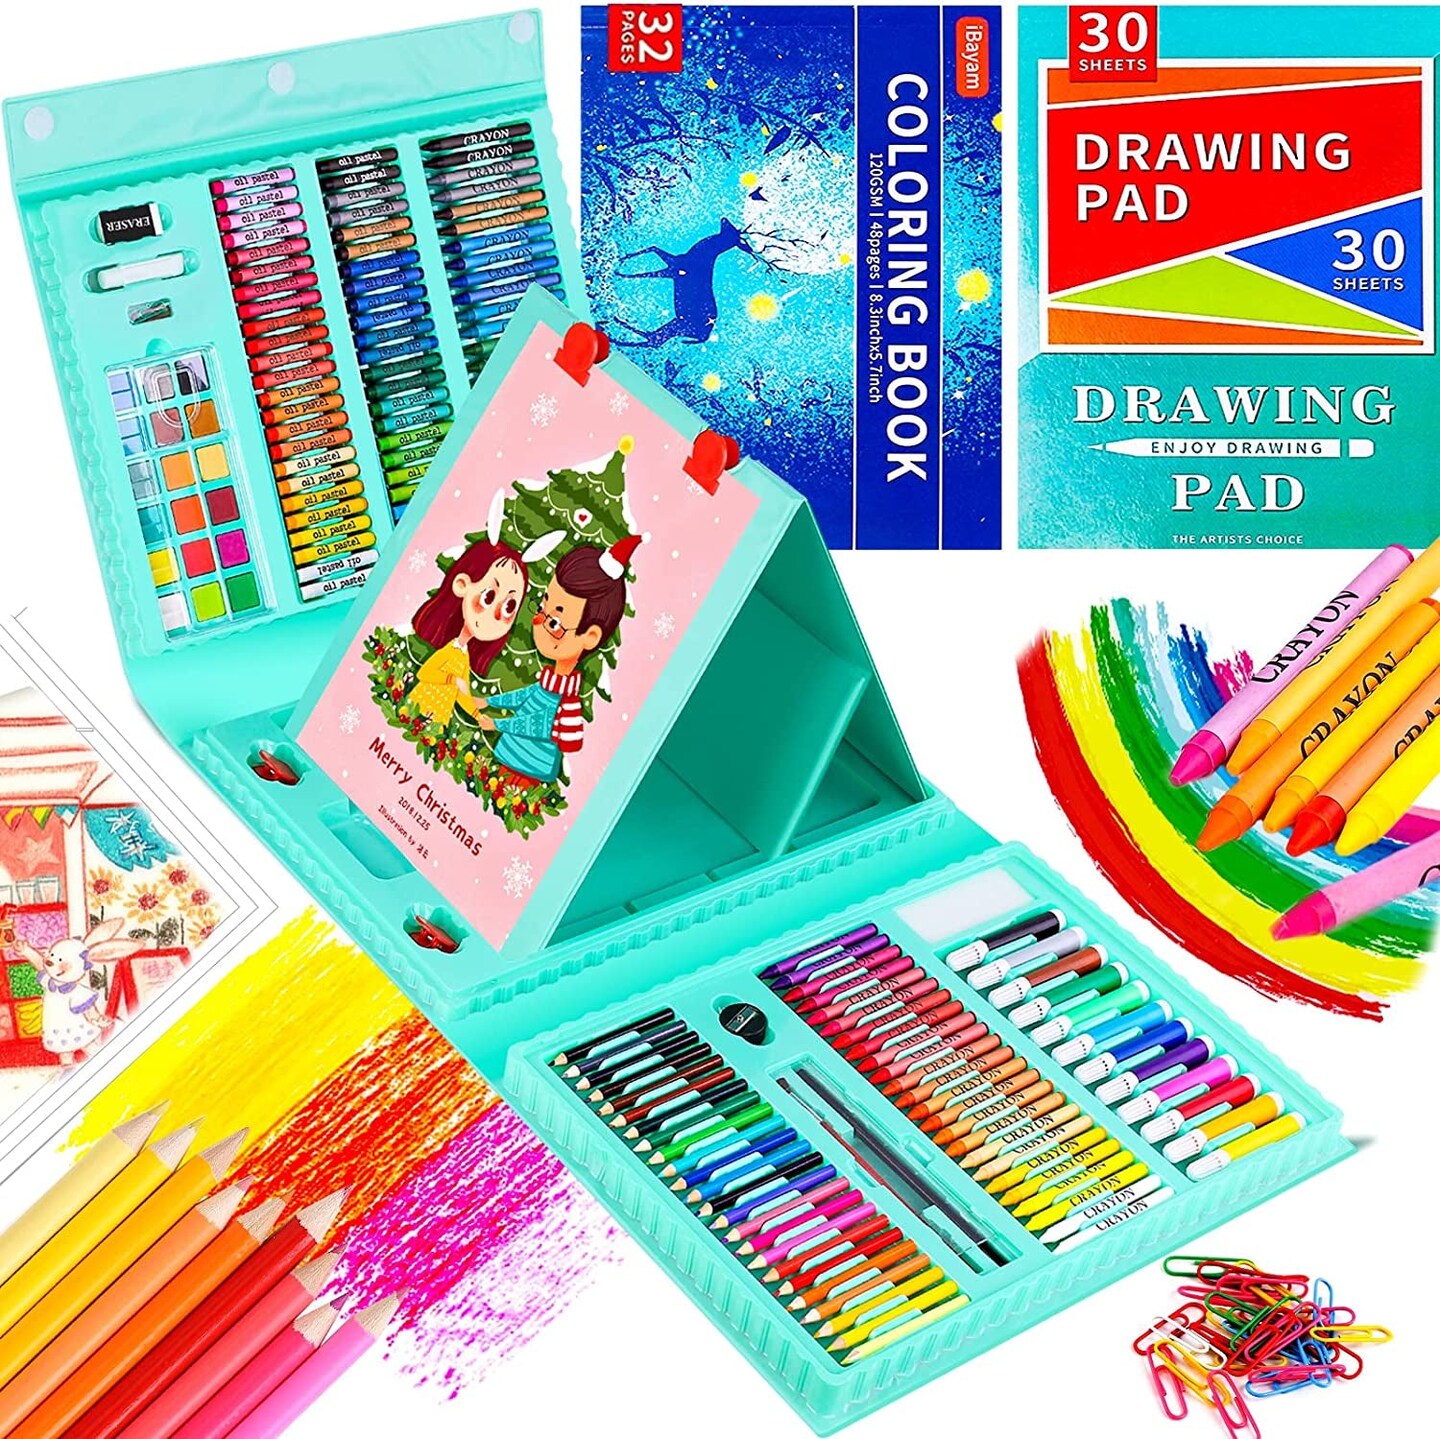 iBayam Art Kit, Supplies Drawing Kits, Arts and Crafts for Kids, Gifts Teen  Girls Boys 6-8-9-12, Set Case with Trifold Easel, Sketch Pad, Coloring  Book, Pastels, Crayons, Pencils